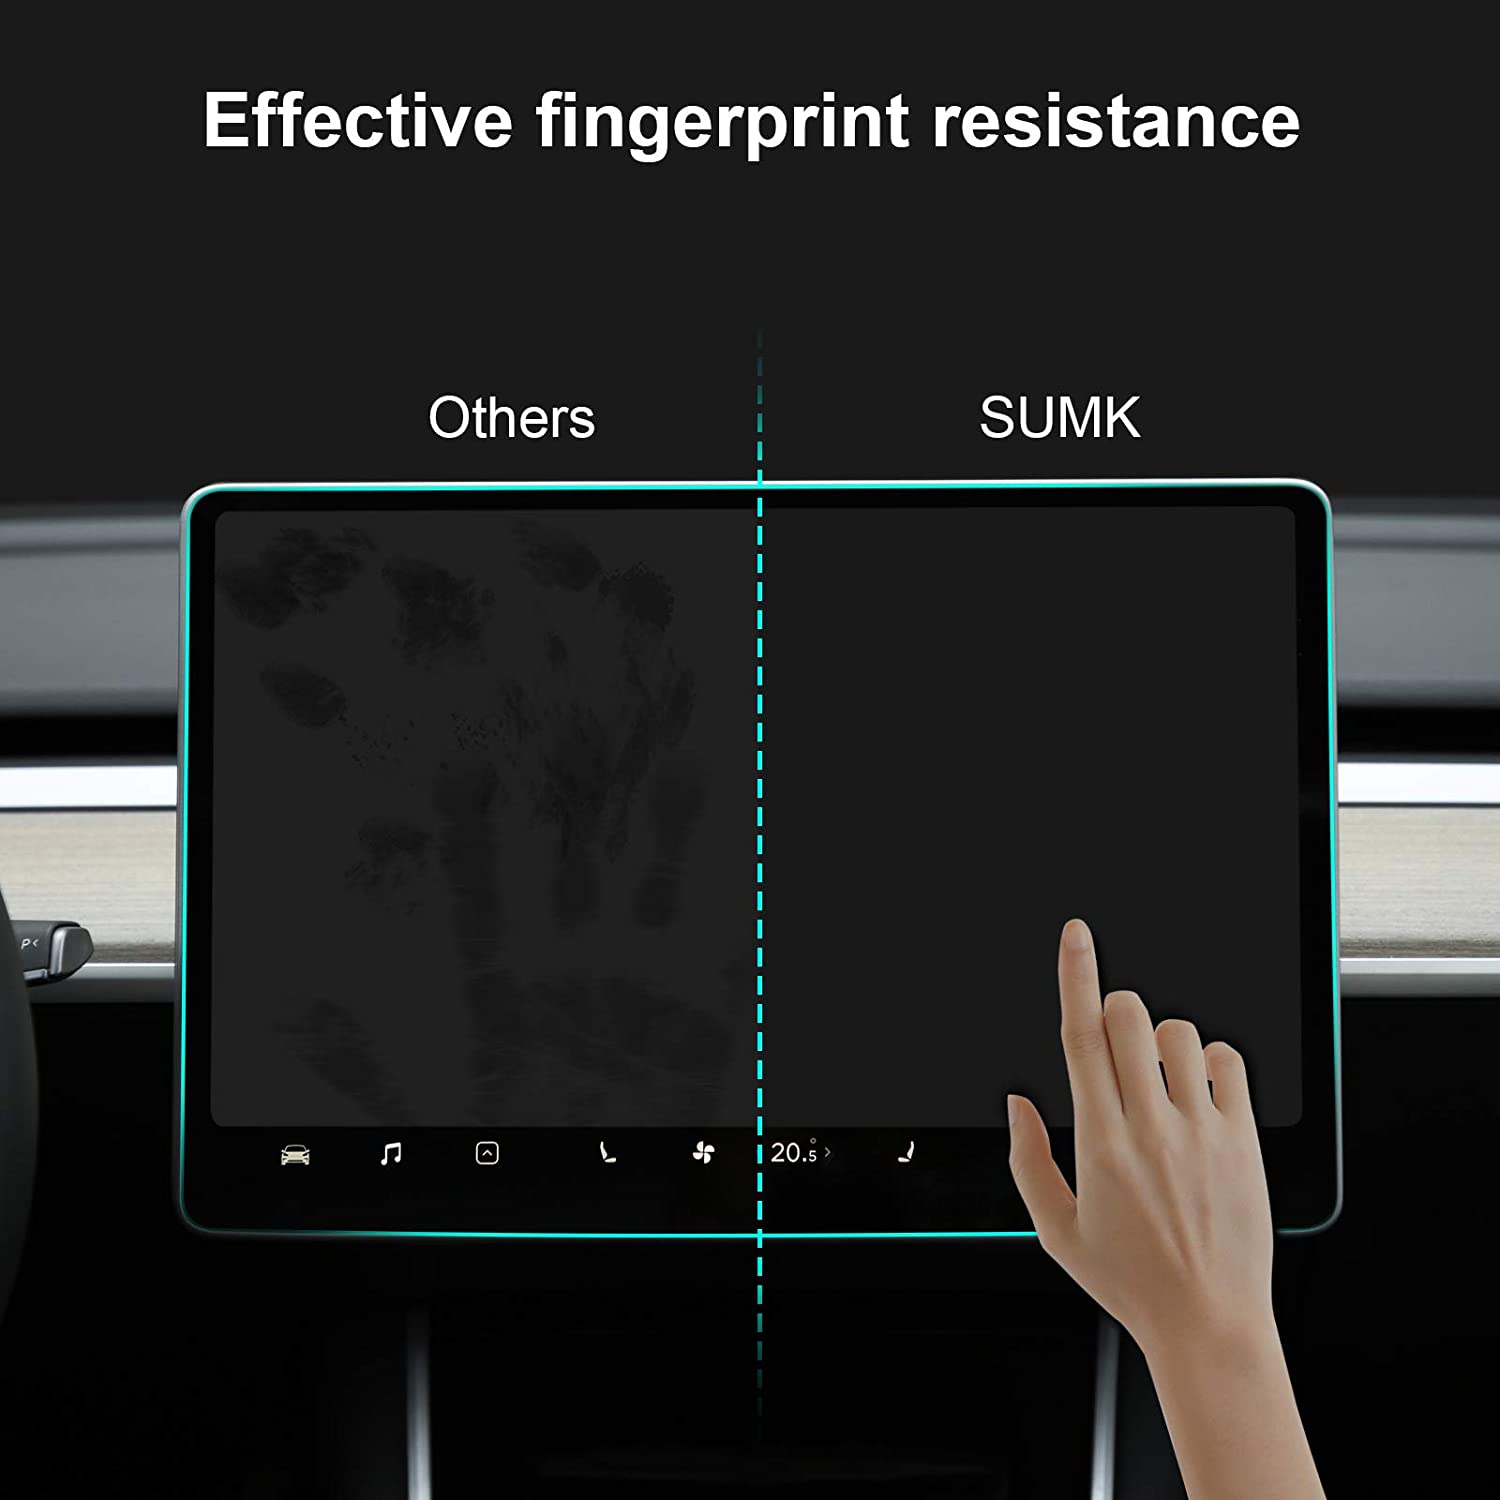 Tempered Protective Film For 15" center touch screen for Tesla Model 3 / Y - Tesery Official Store